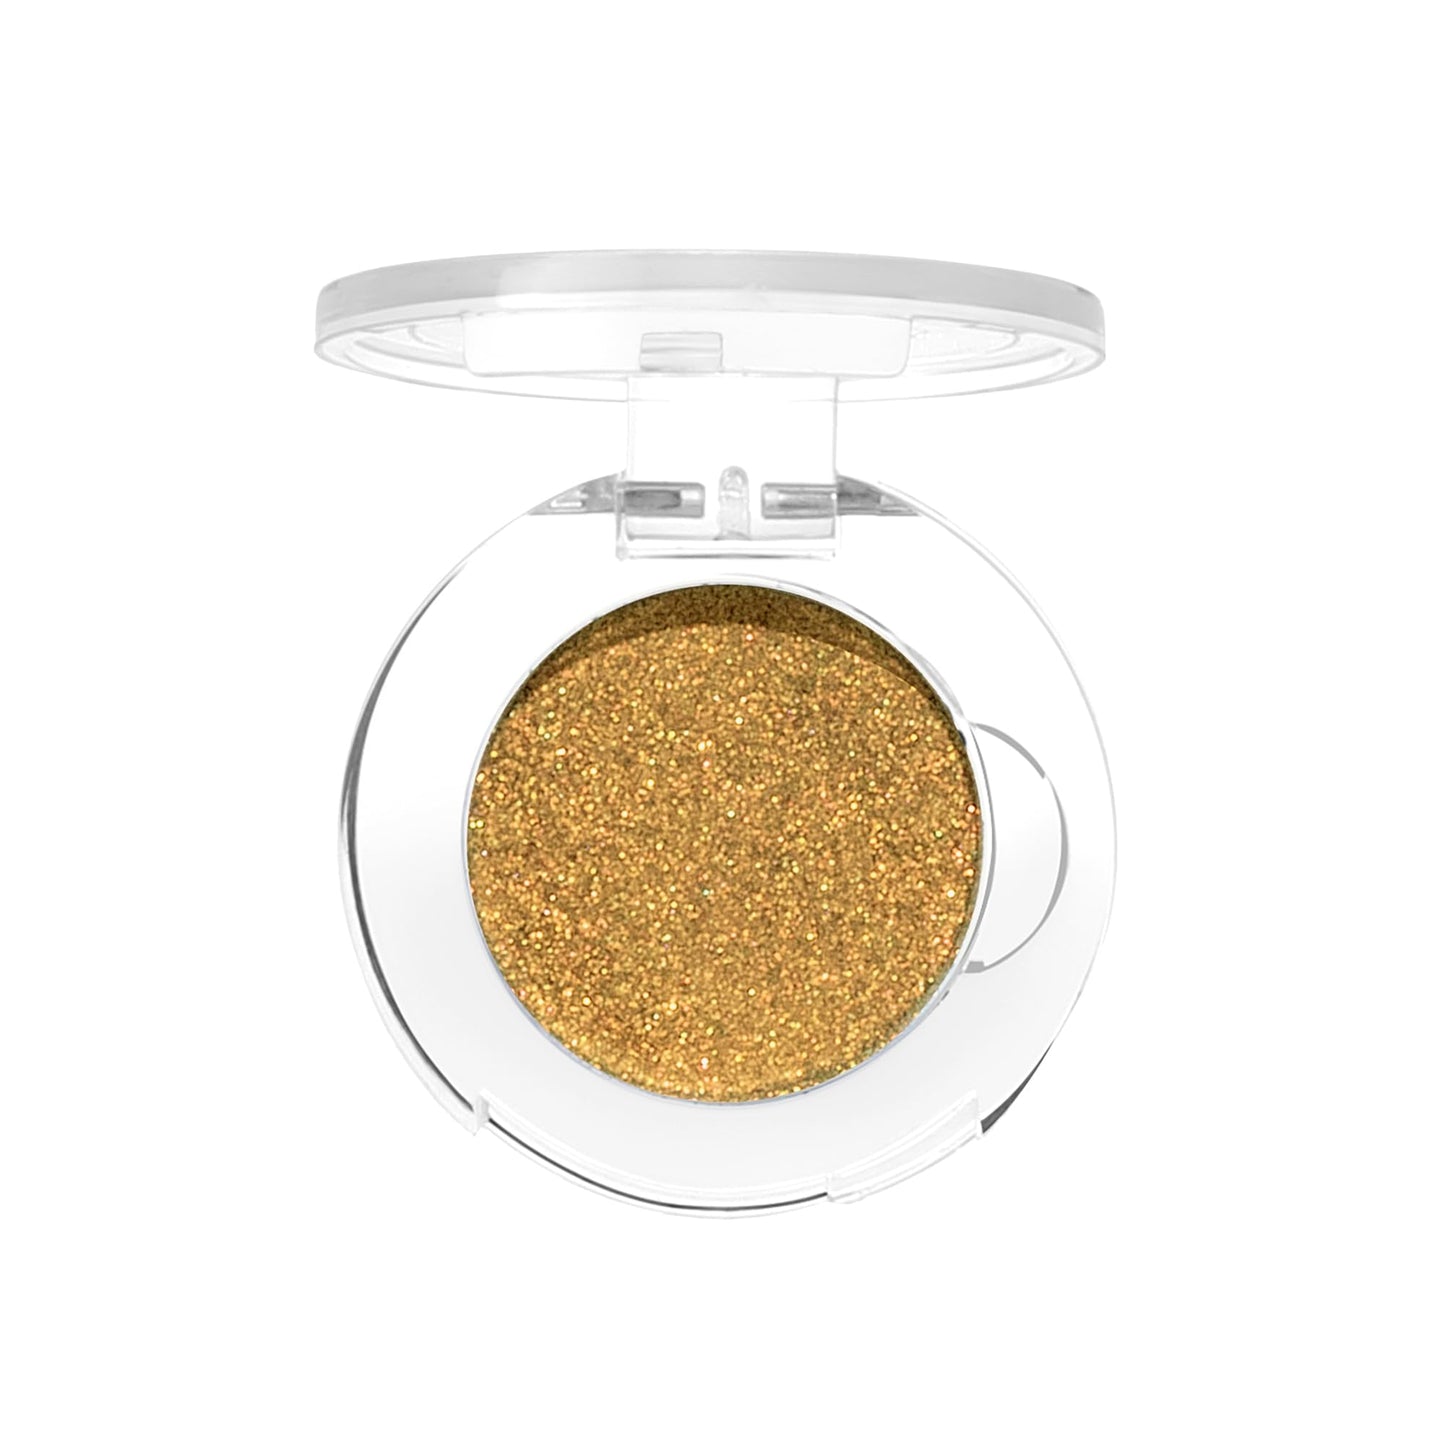 MARS Northern Lights In A Pan Eyeshadow With Dual-Tone Shimmer Shades | Single Swipe Pigmentation | Easy to Blend | 0.5gm | (01-SWIRLING SWEDEN)